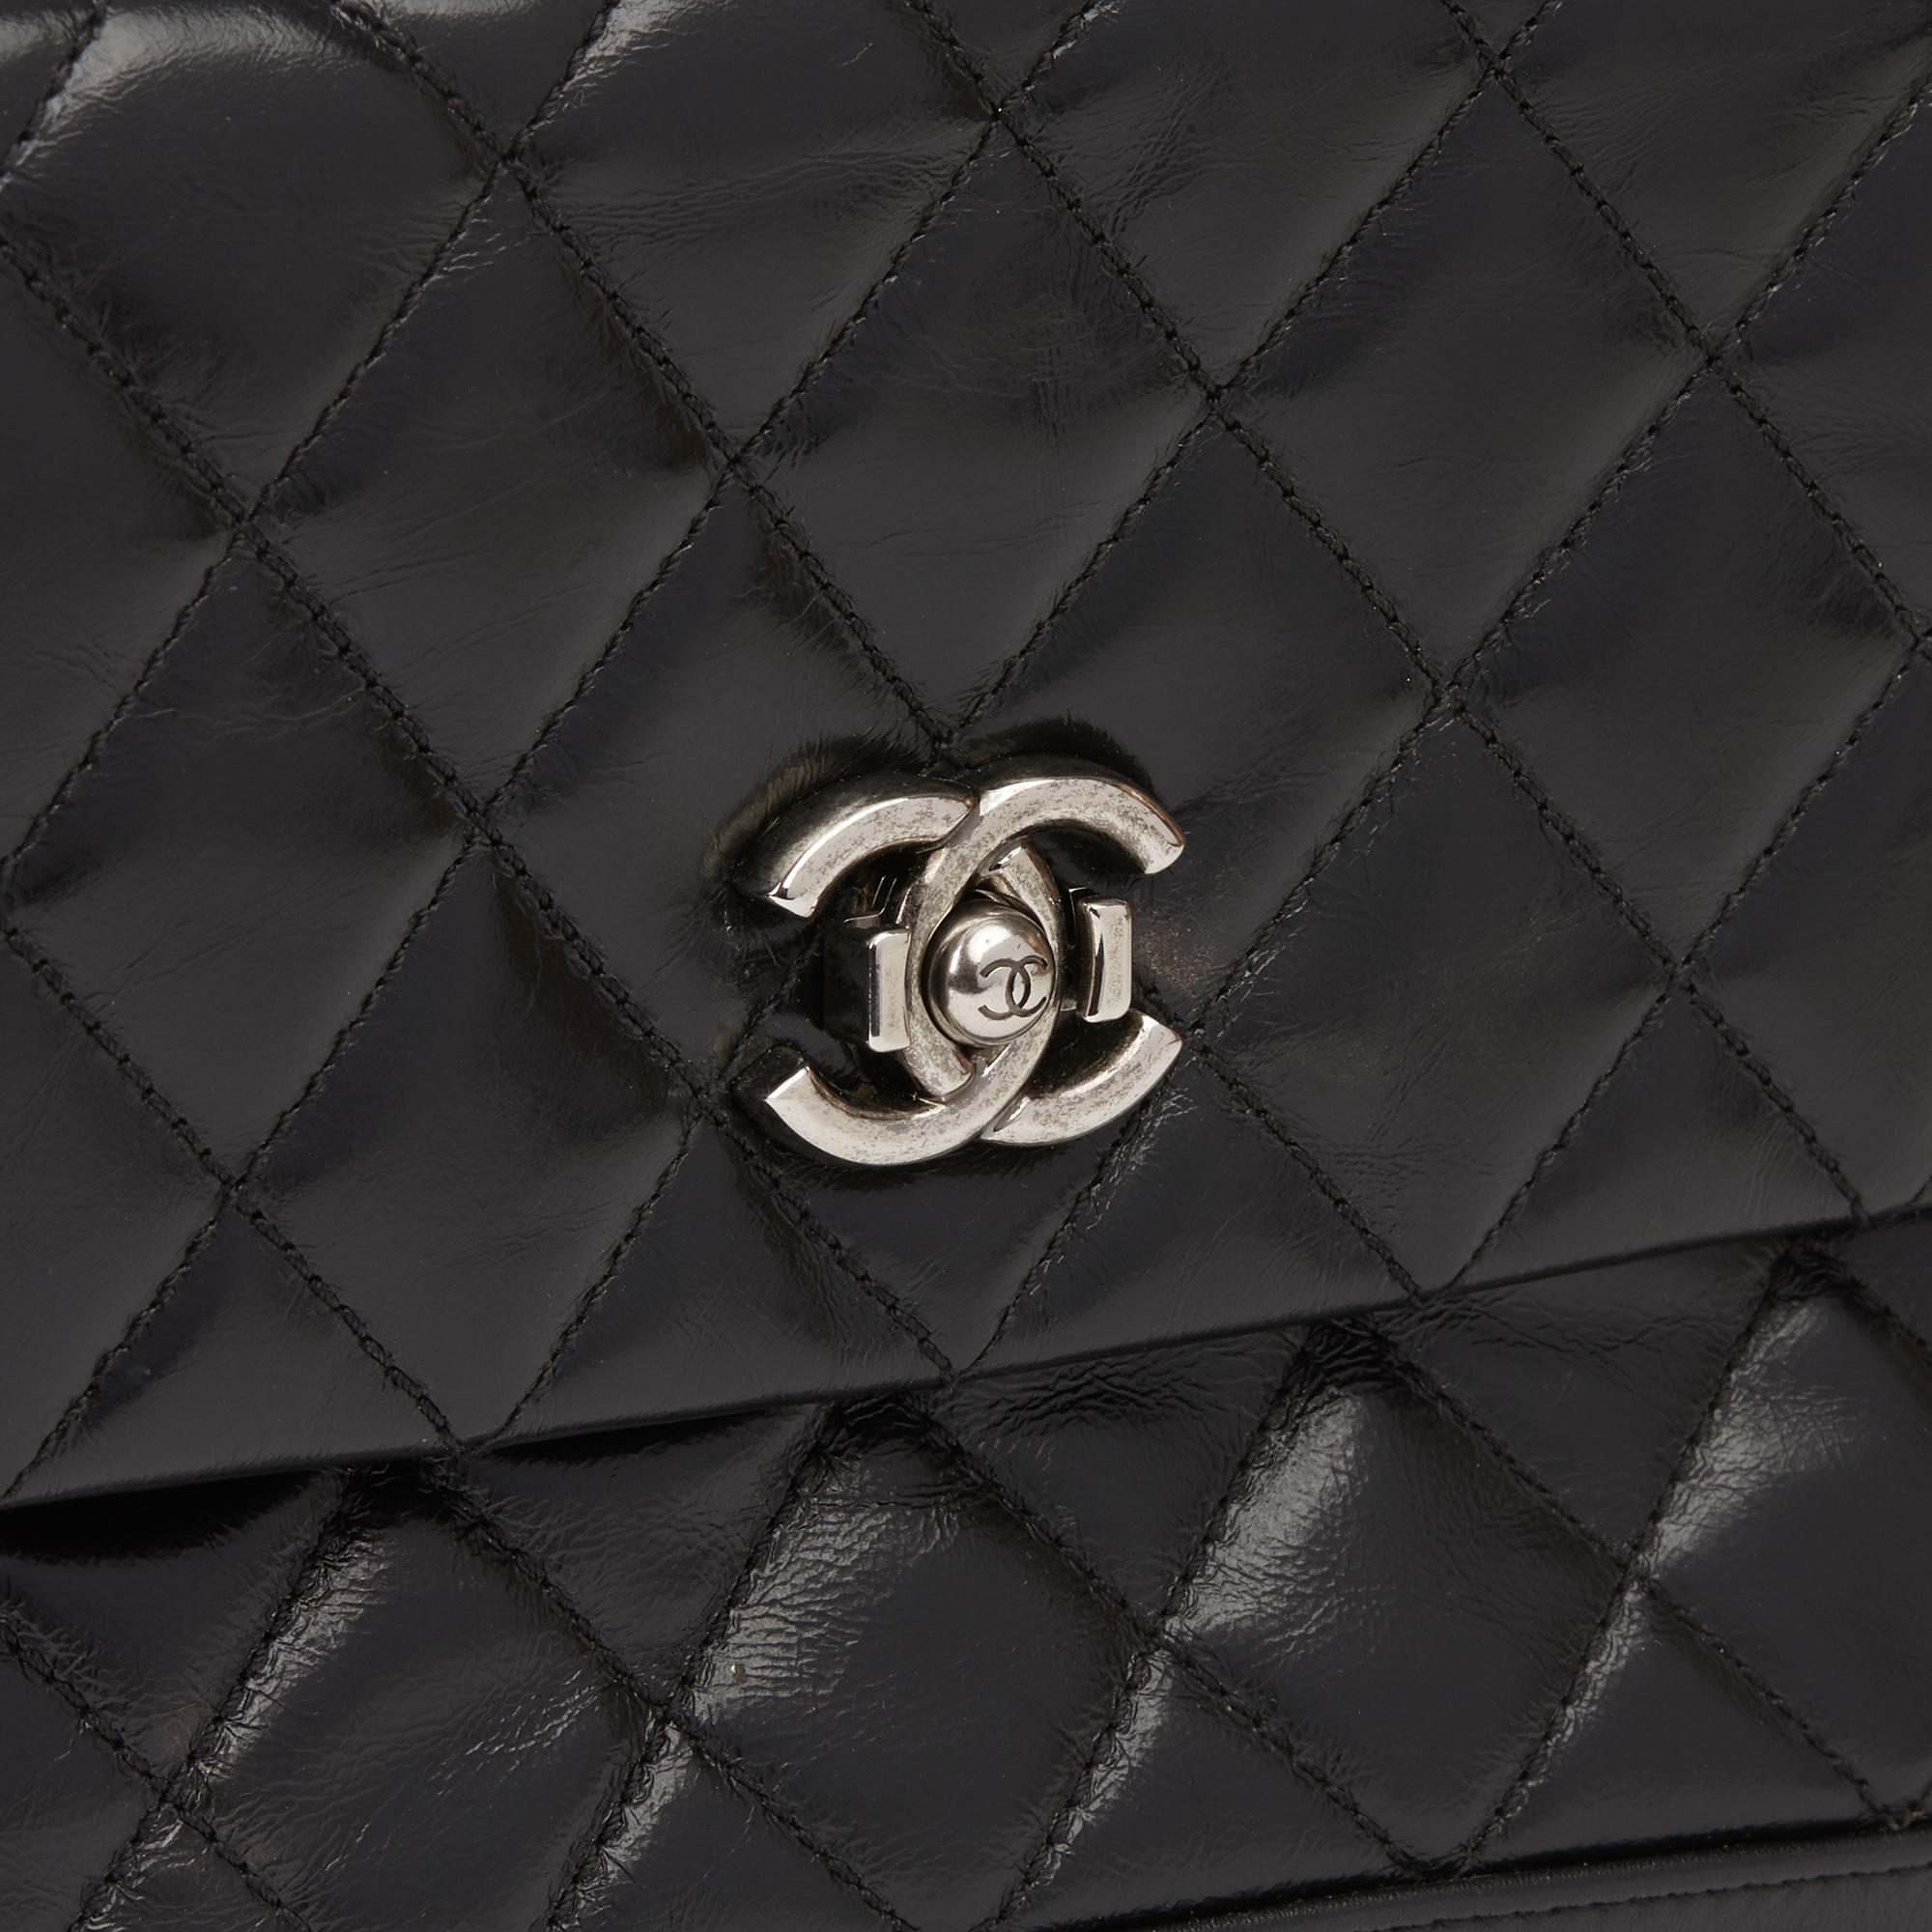 2013 Chanel Black Quilted Glazed Calfskin Leather Classic Single Flap Bag 2